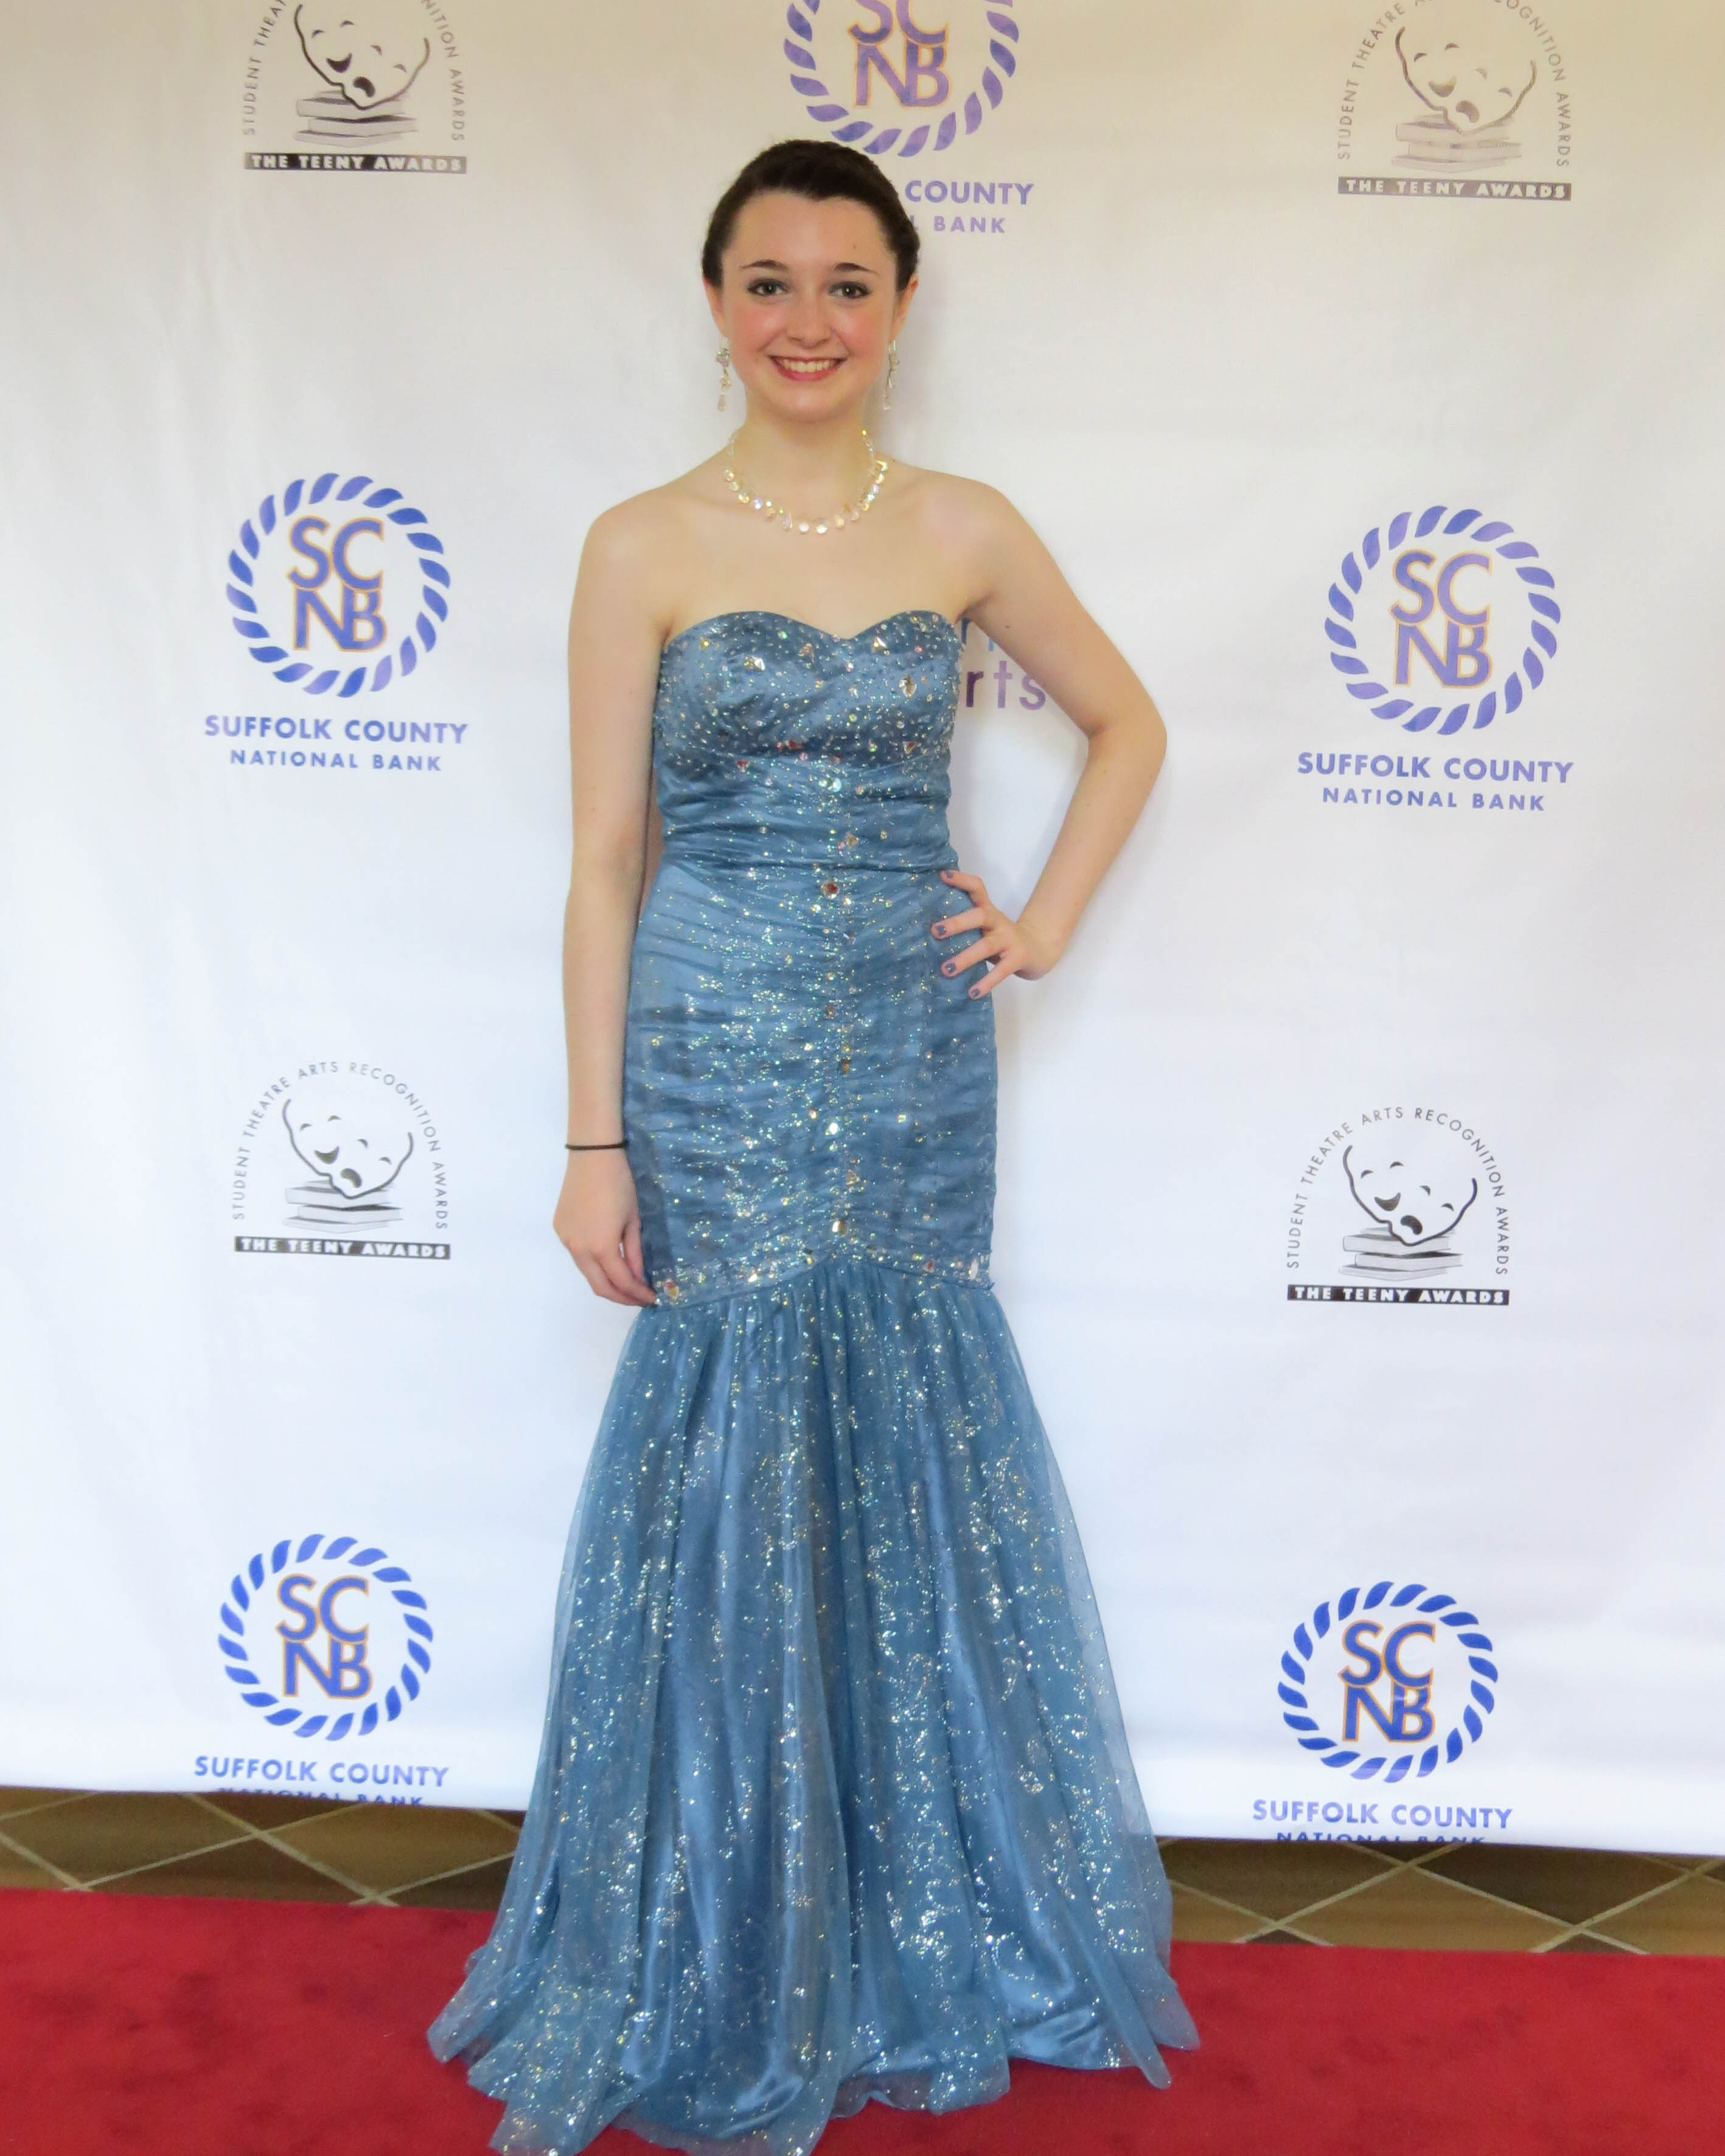 Colleen Kelly on the red carpet at the 2014 EEA Teeny Awards